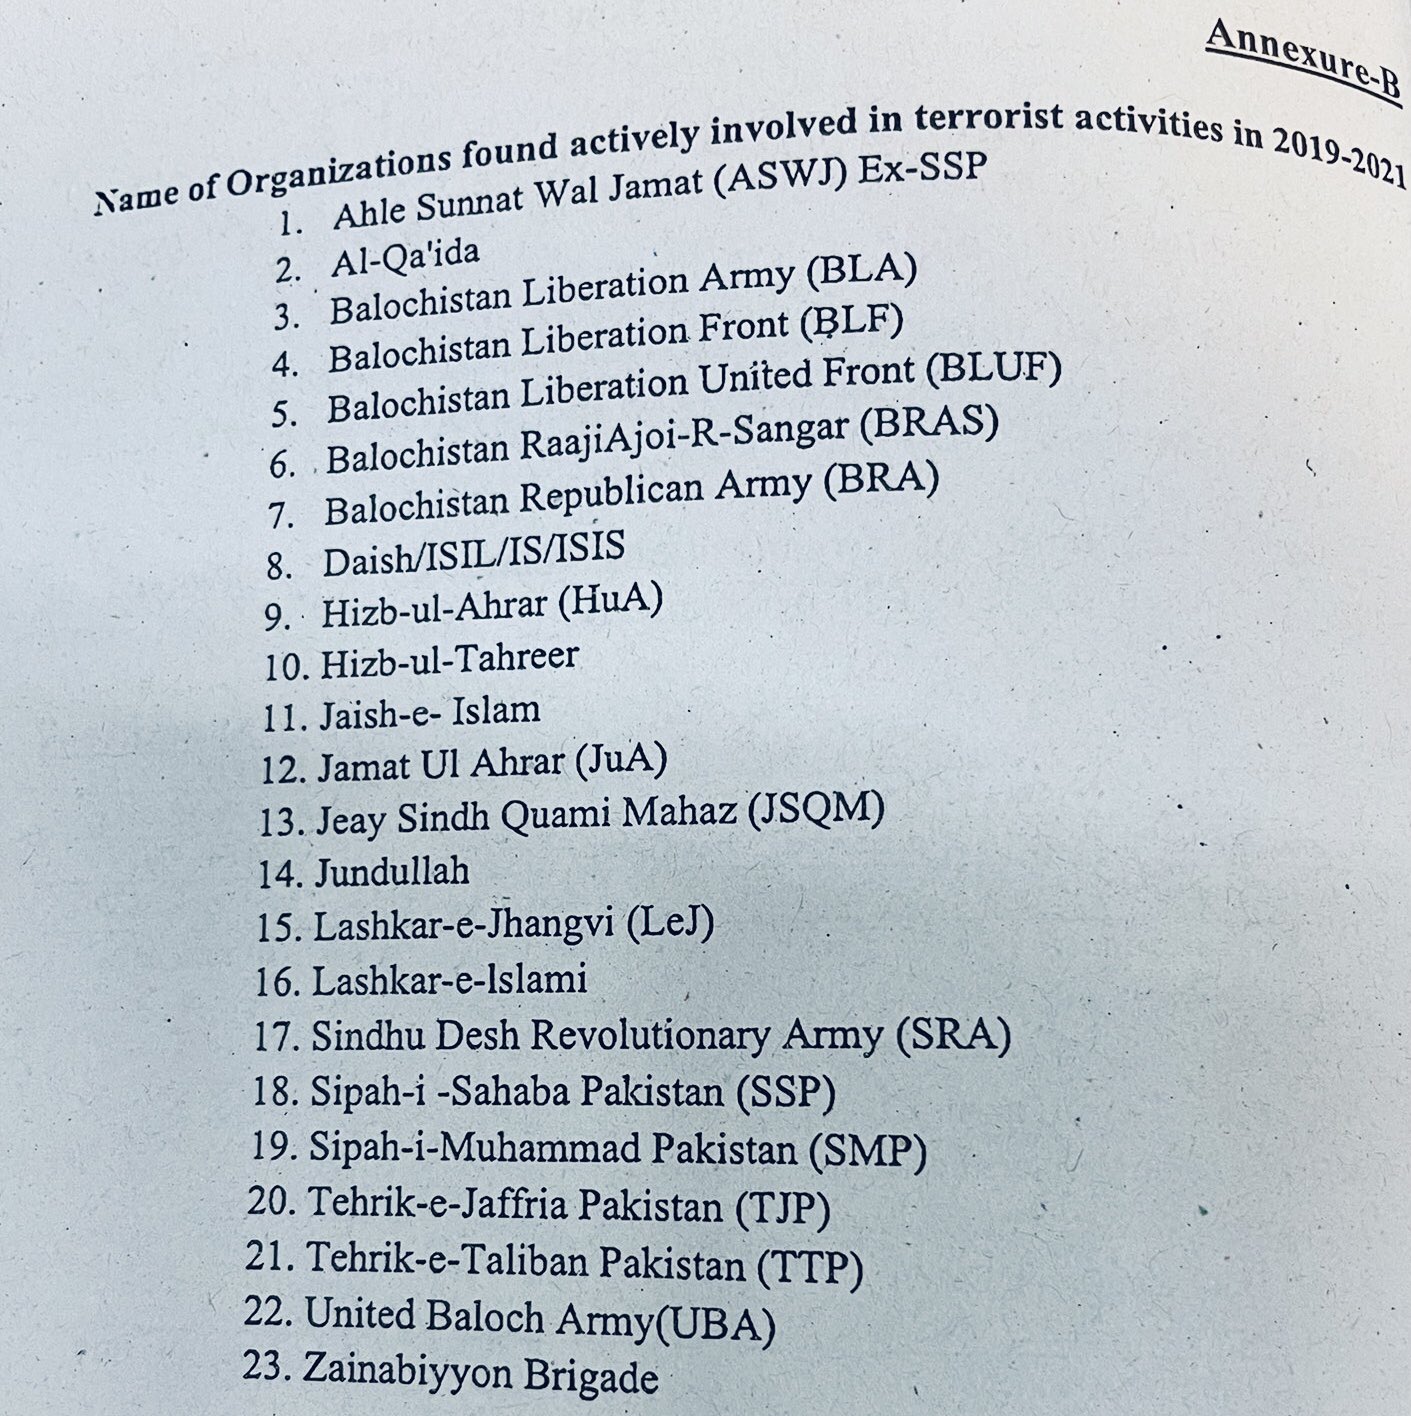 Ministry of Interior Submitted List of Banned Organizations in Senate, Linked to Terrorist Activities in 2019-2021, Islamabad, Pakistan - 29 July 2022